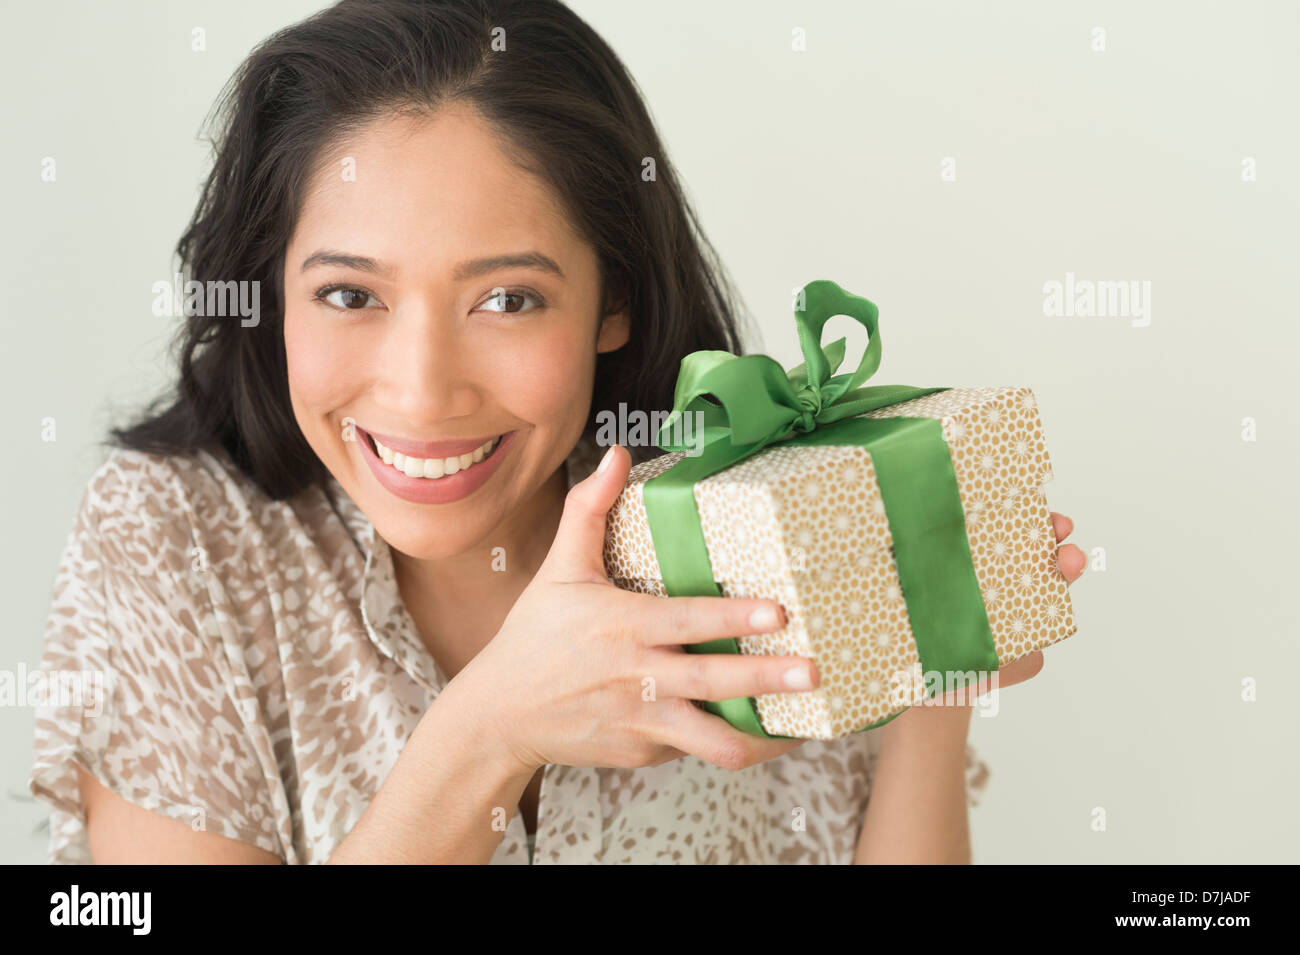 Young woman holding wrapped gift Banque D'Images